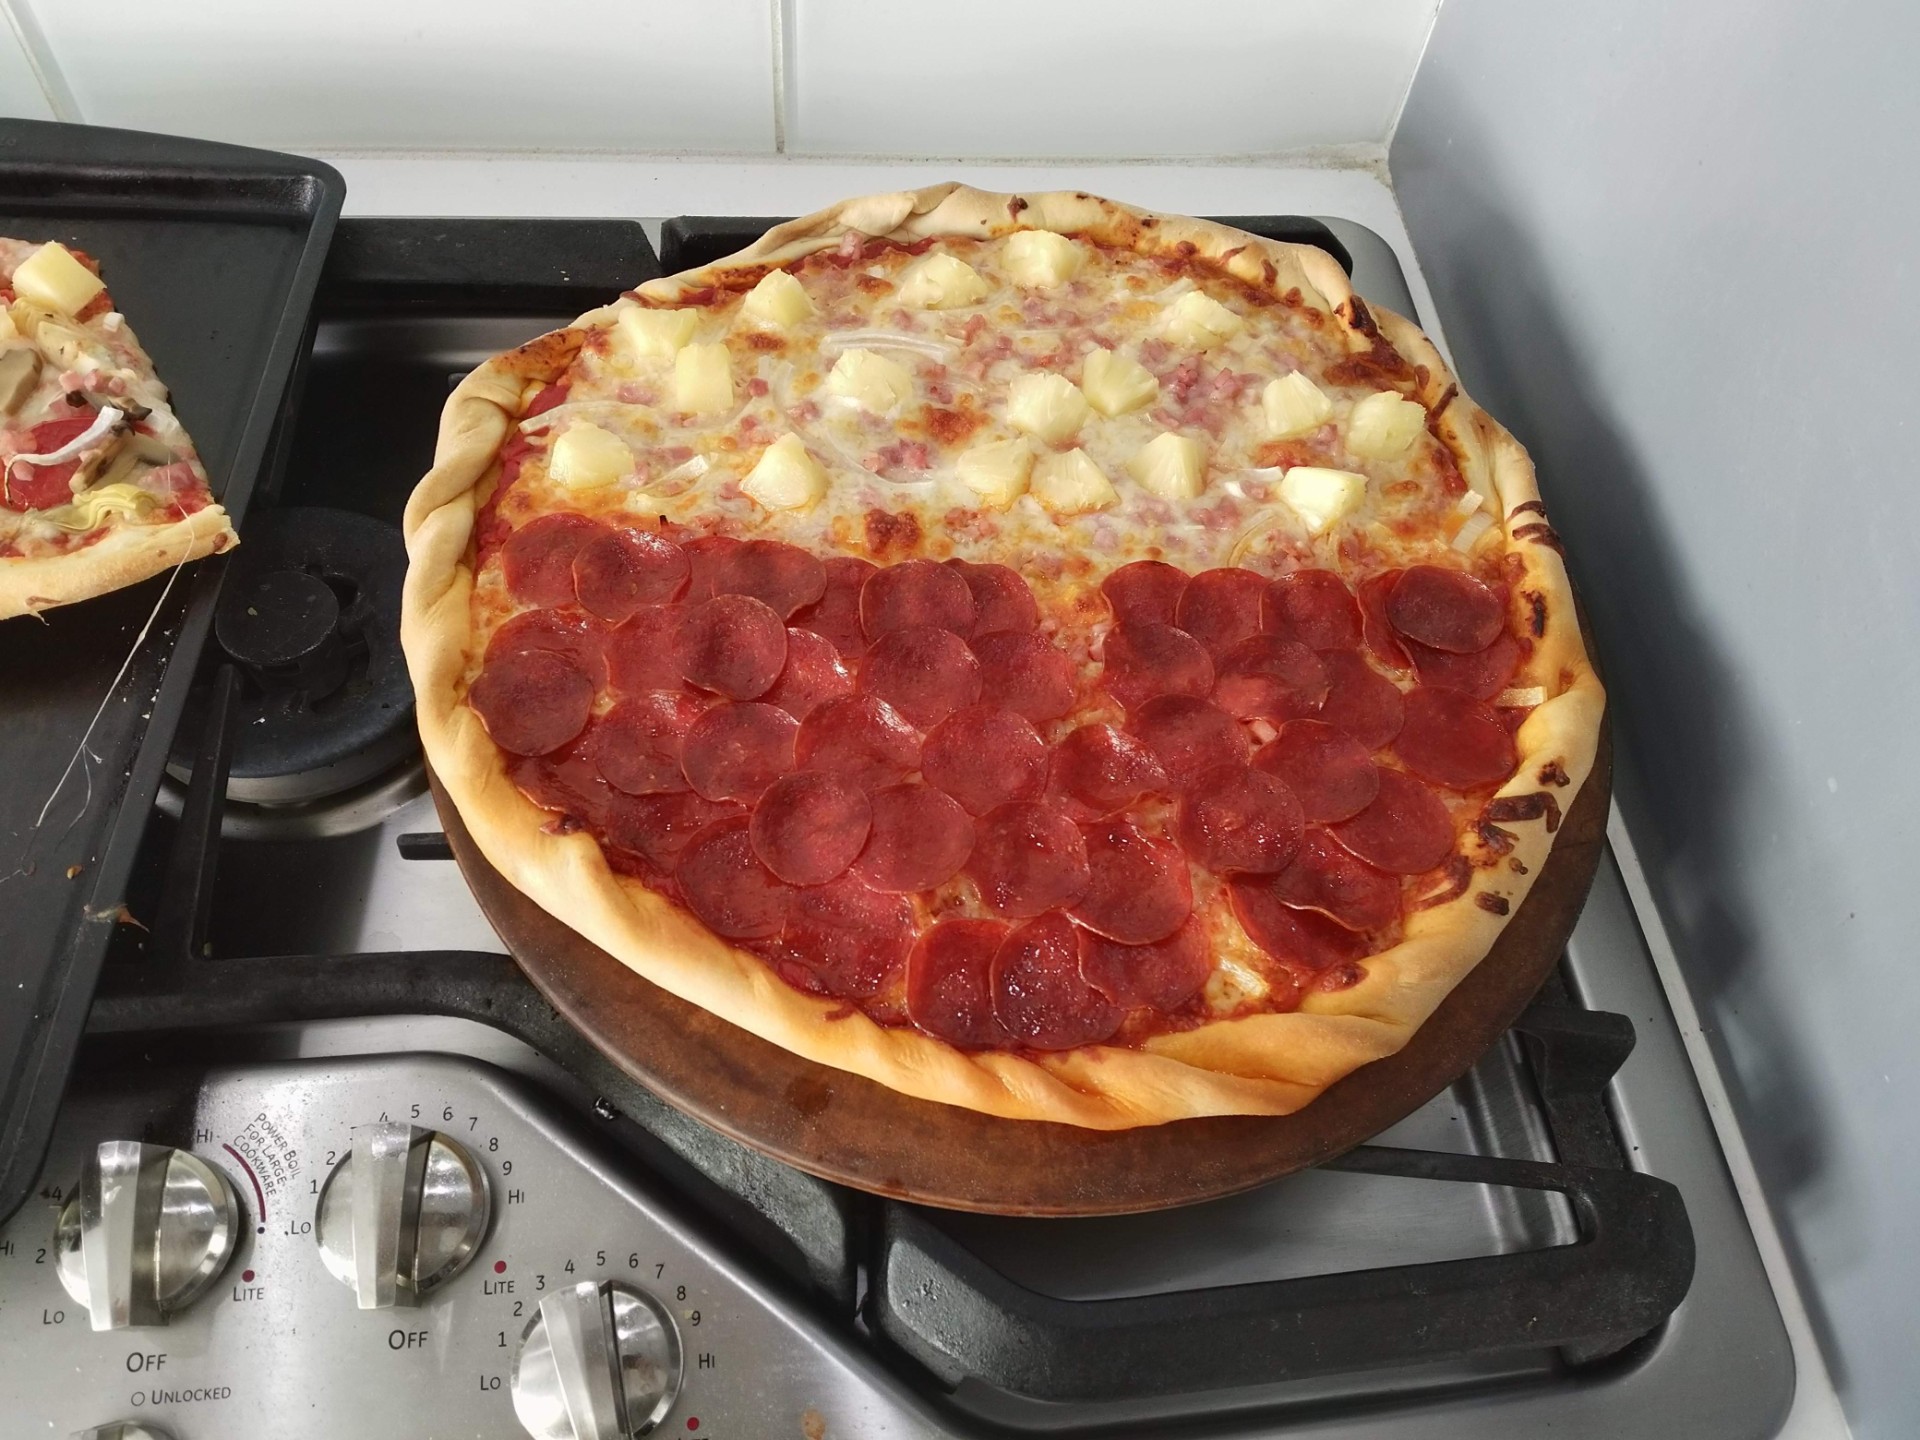 Pizza cooked with pepperoni